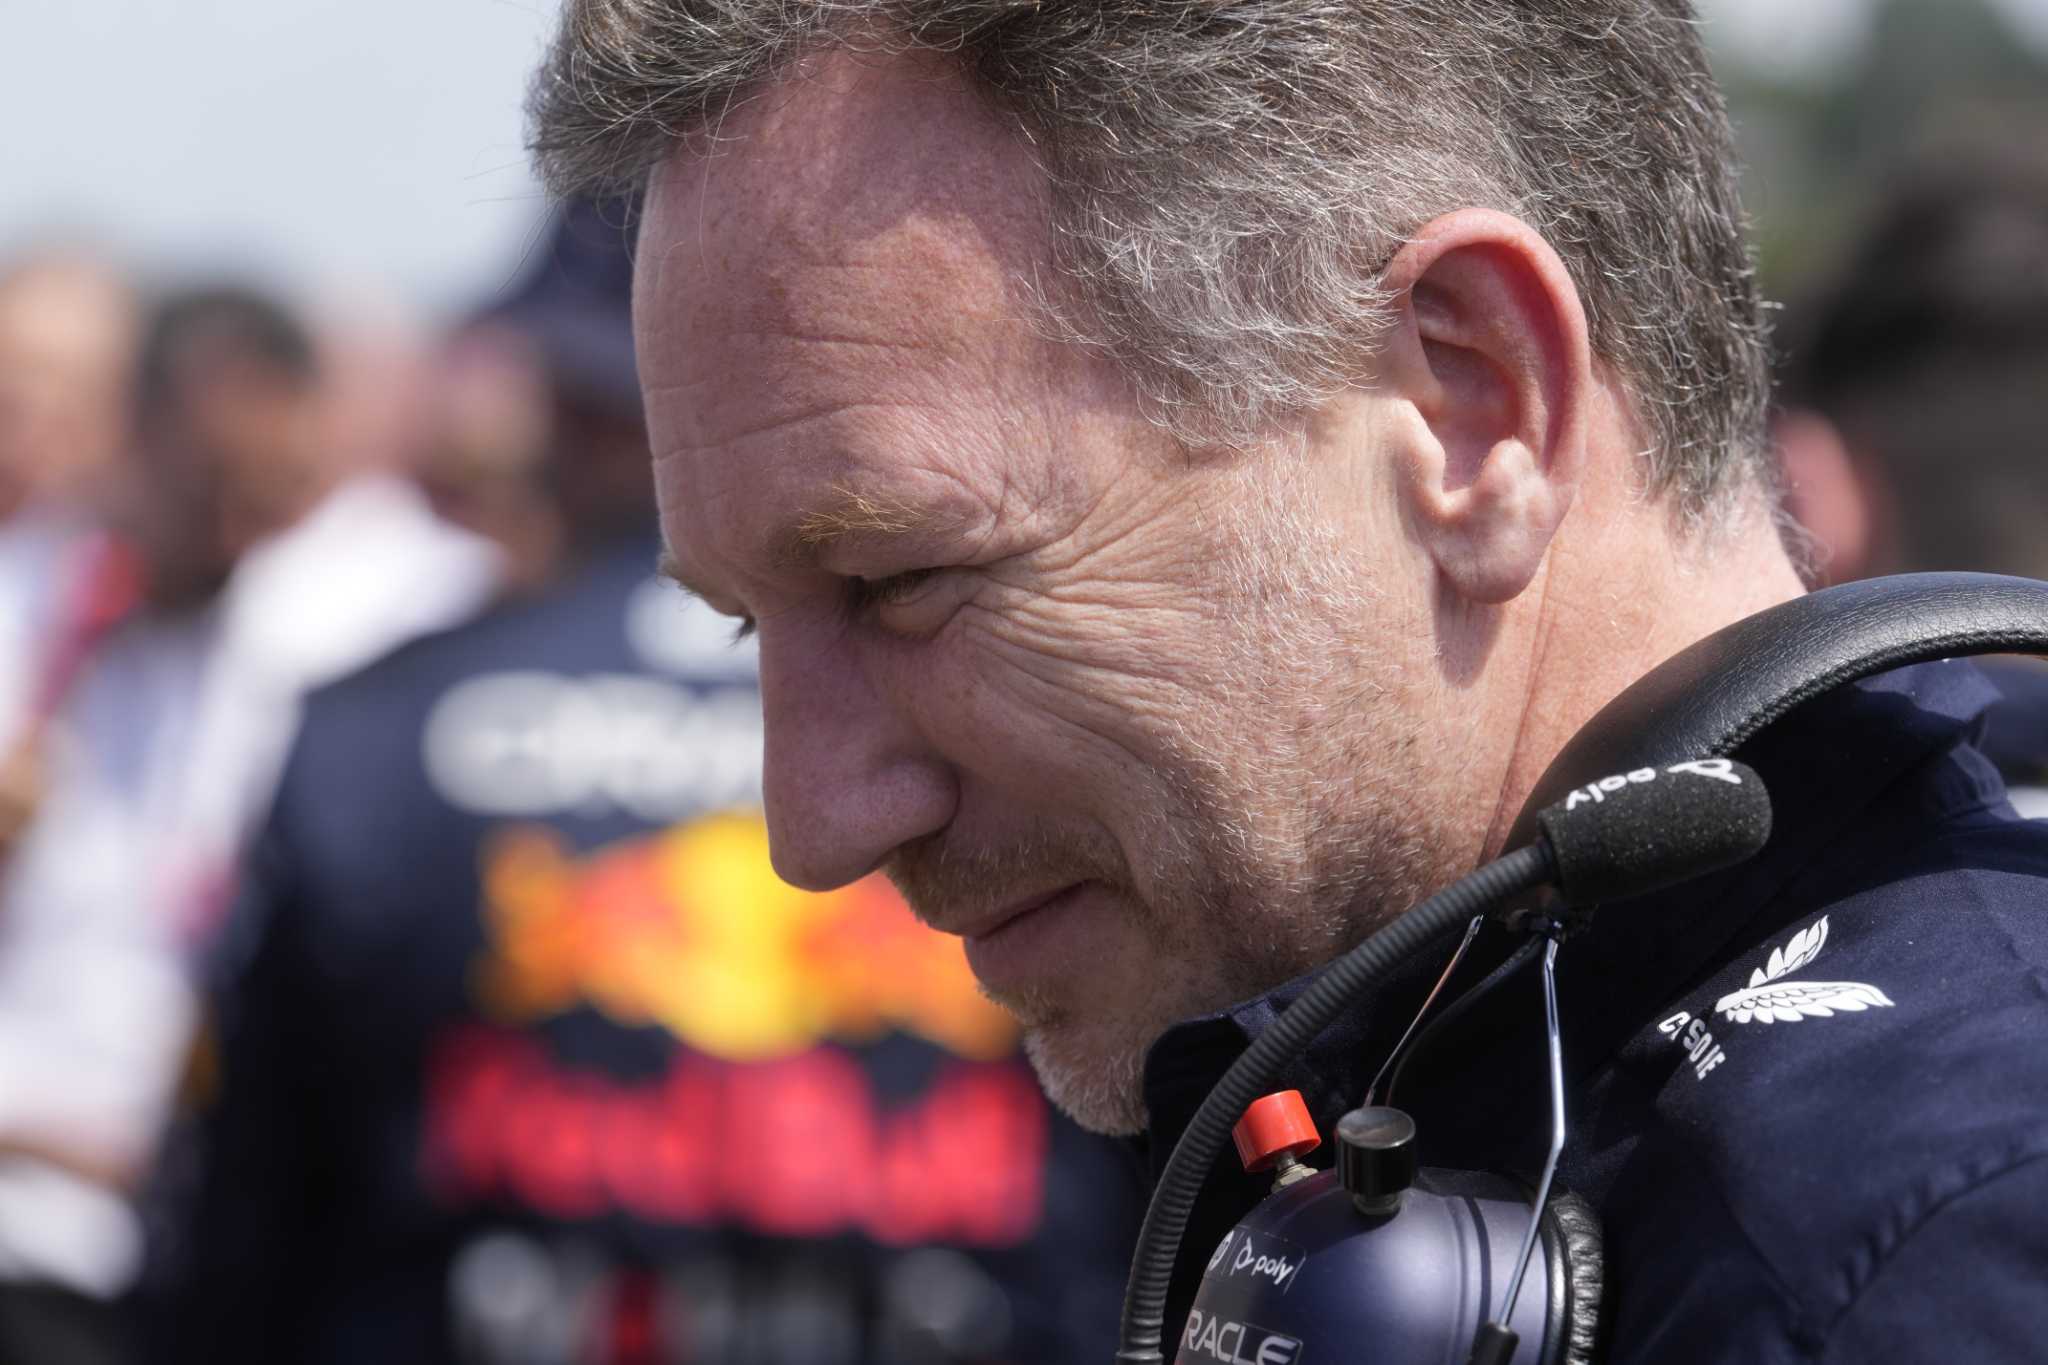 Red Bull's Horner 'surprised' that thwarted F1 bid by Andretti has become political